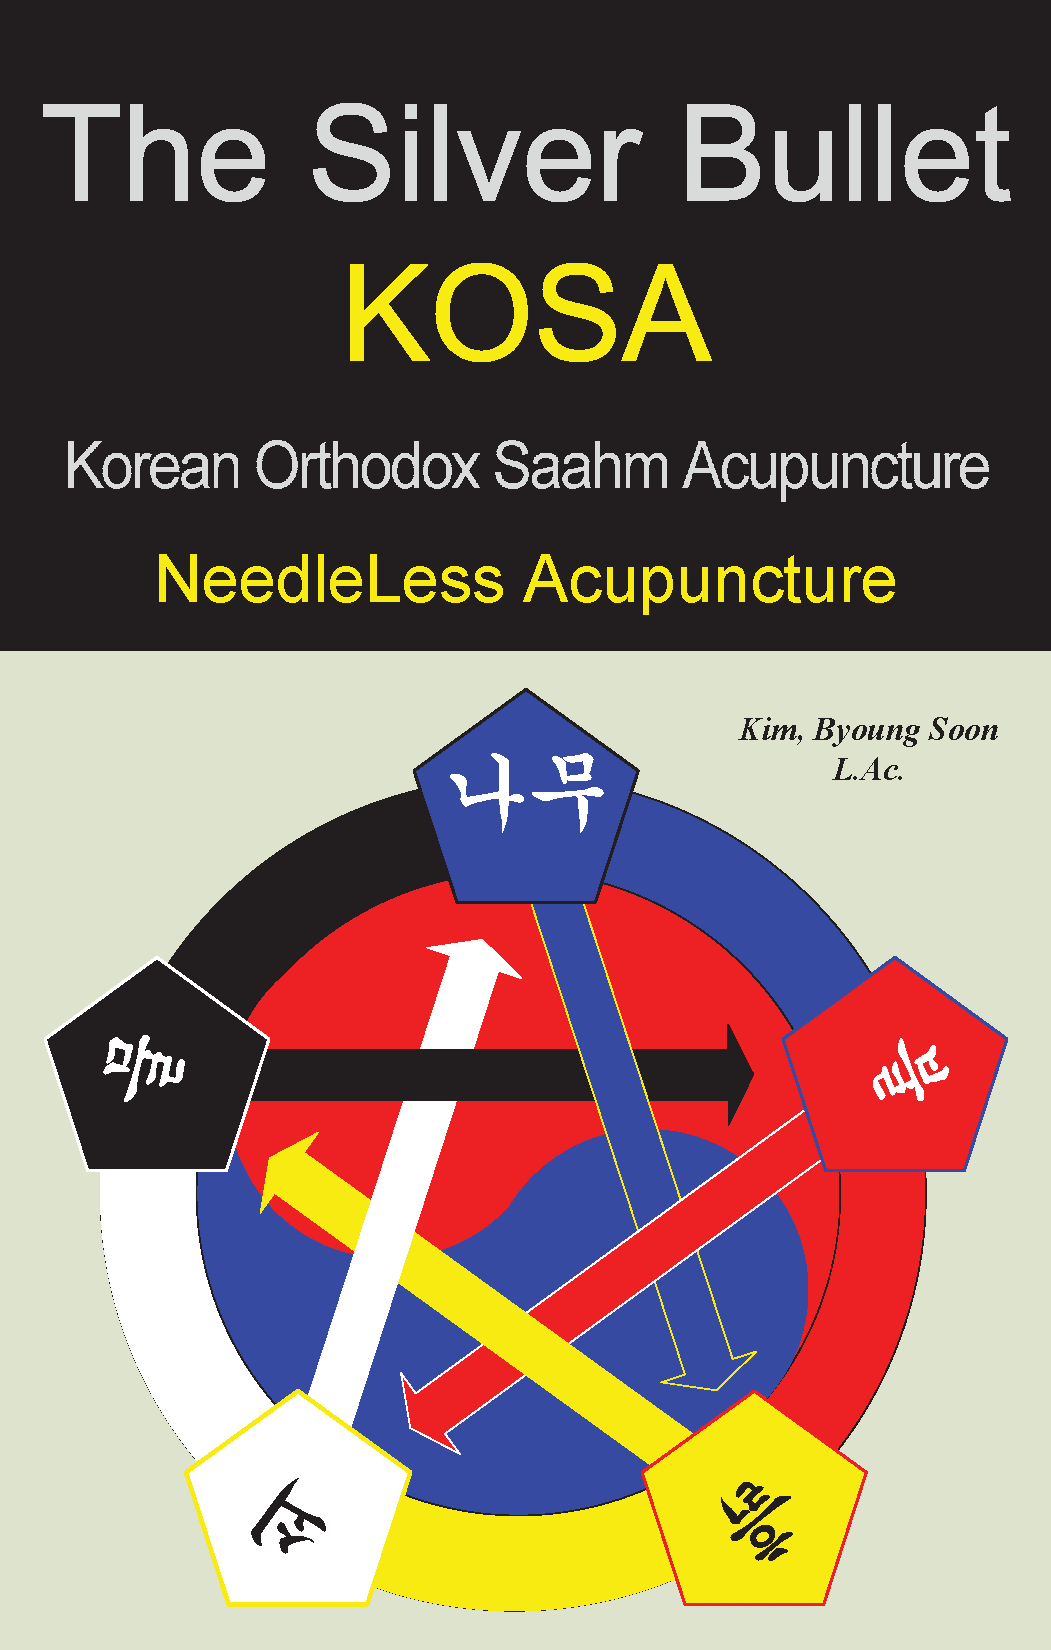 Silver Bullet - KOSA (Korean Orthodox Saahm Acupuncture) - Needleless Acupuncture in English, Authored by Master Kim at KOSA Acupuncture In Jenks Oklahoma Serving Tulsa Oklahoma and the vicinity